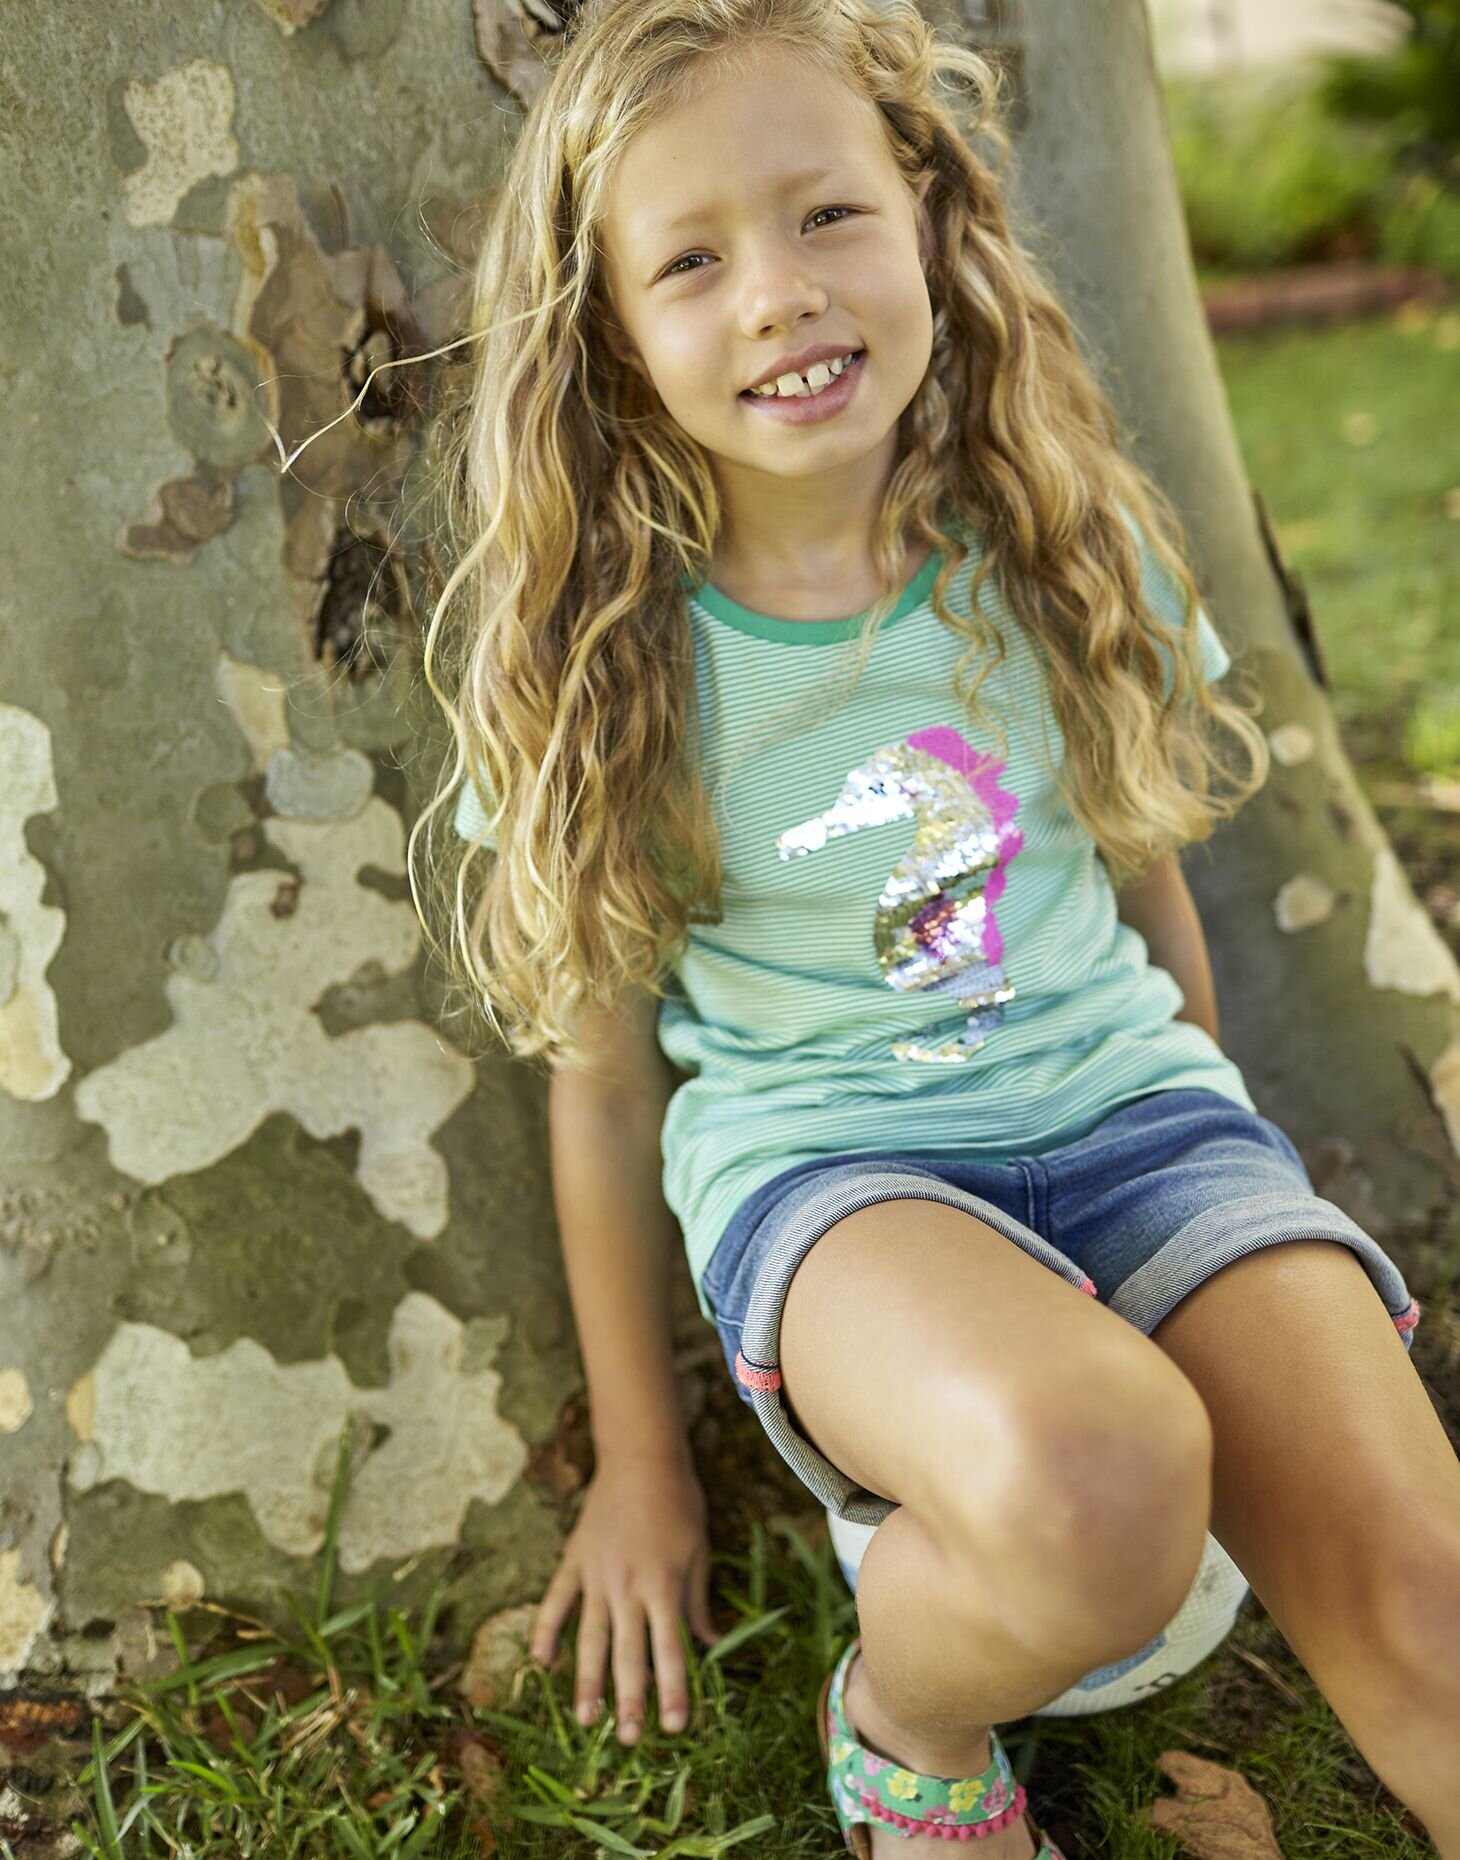 Joules Girls Clothing